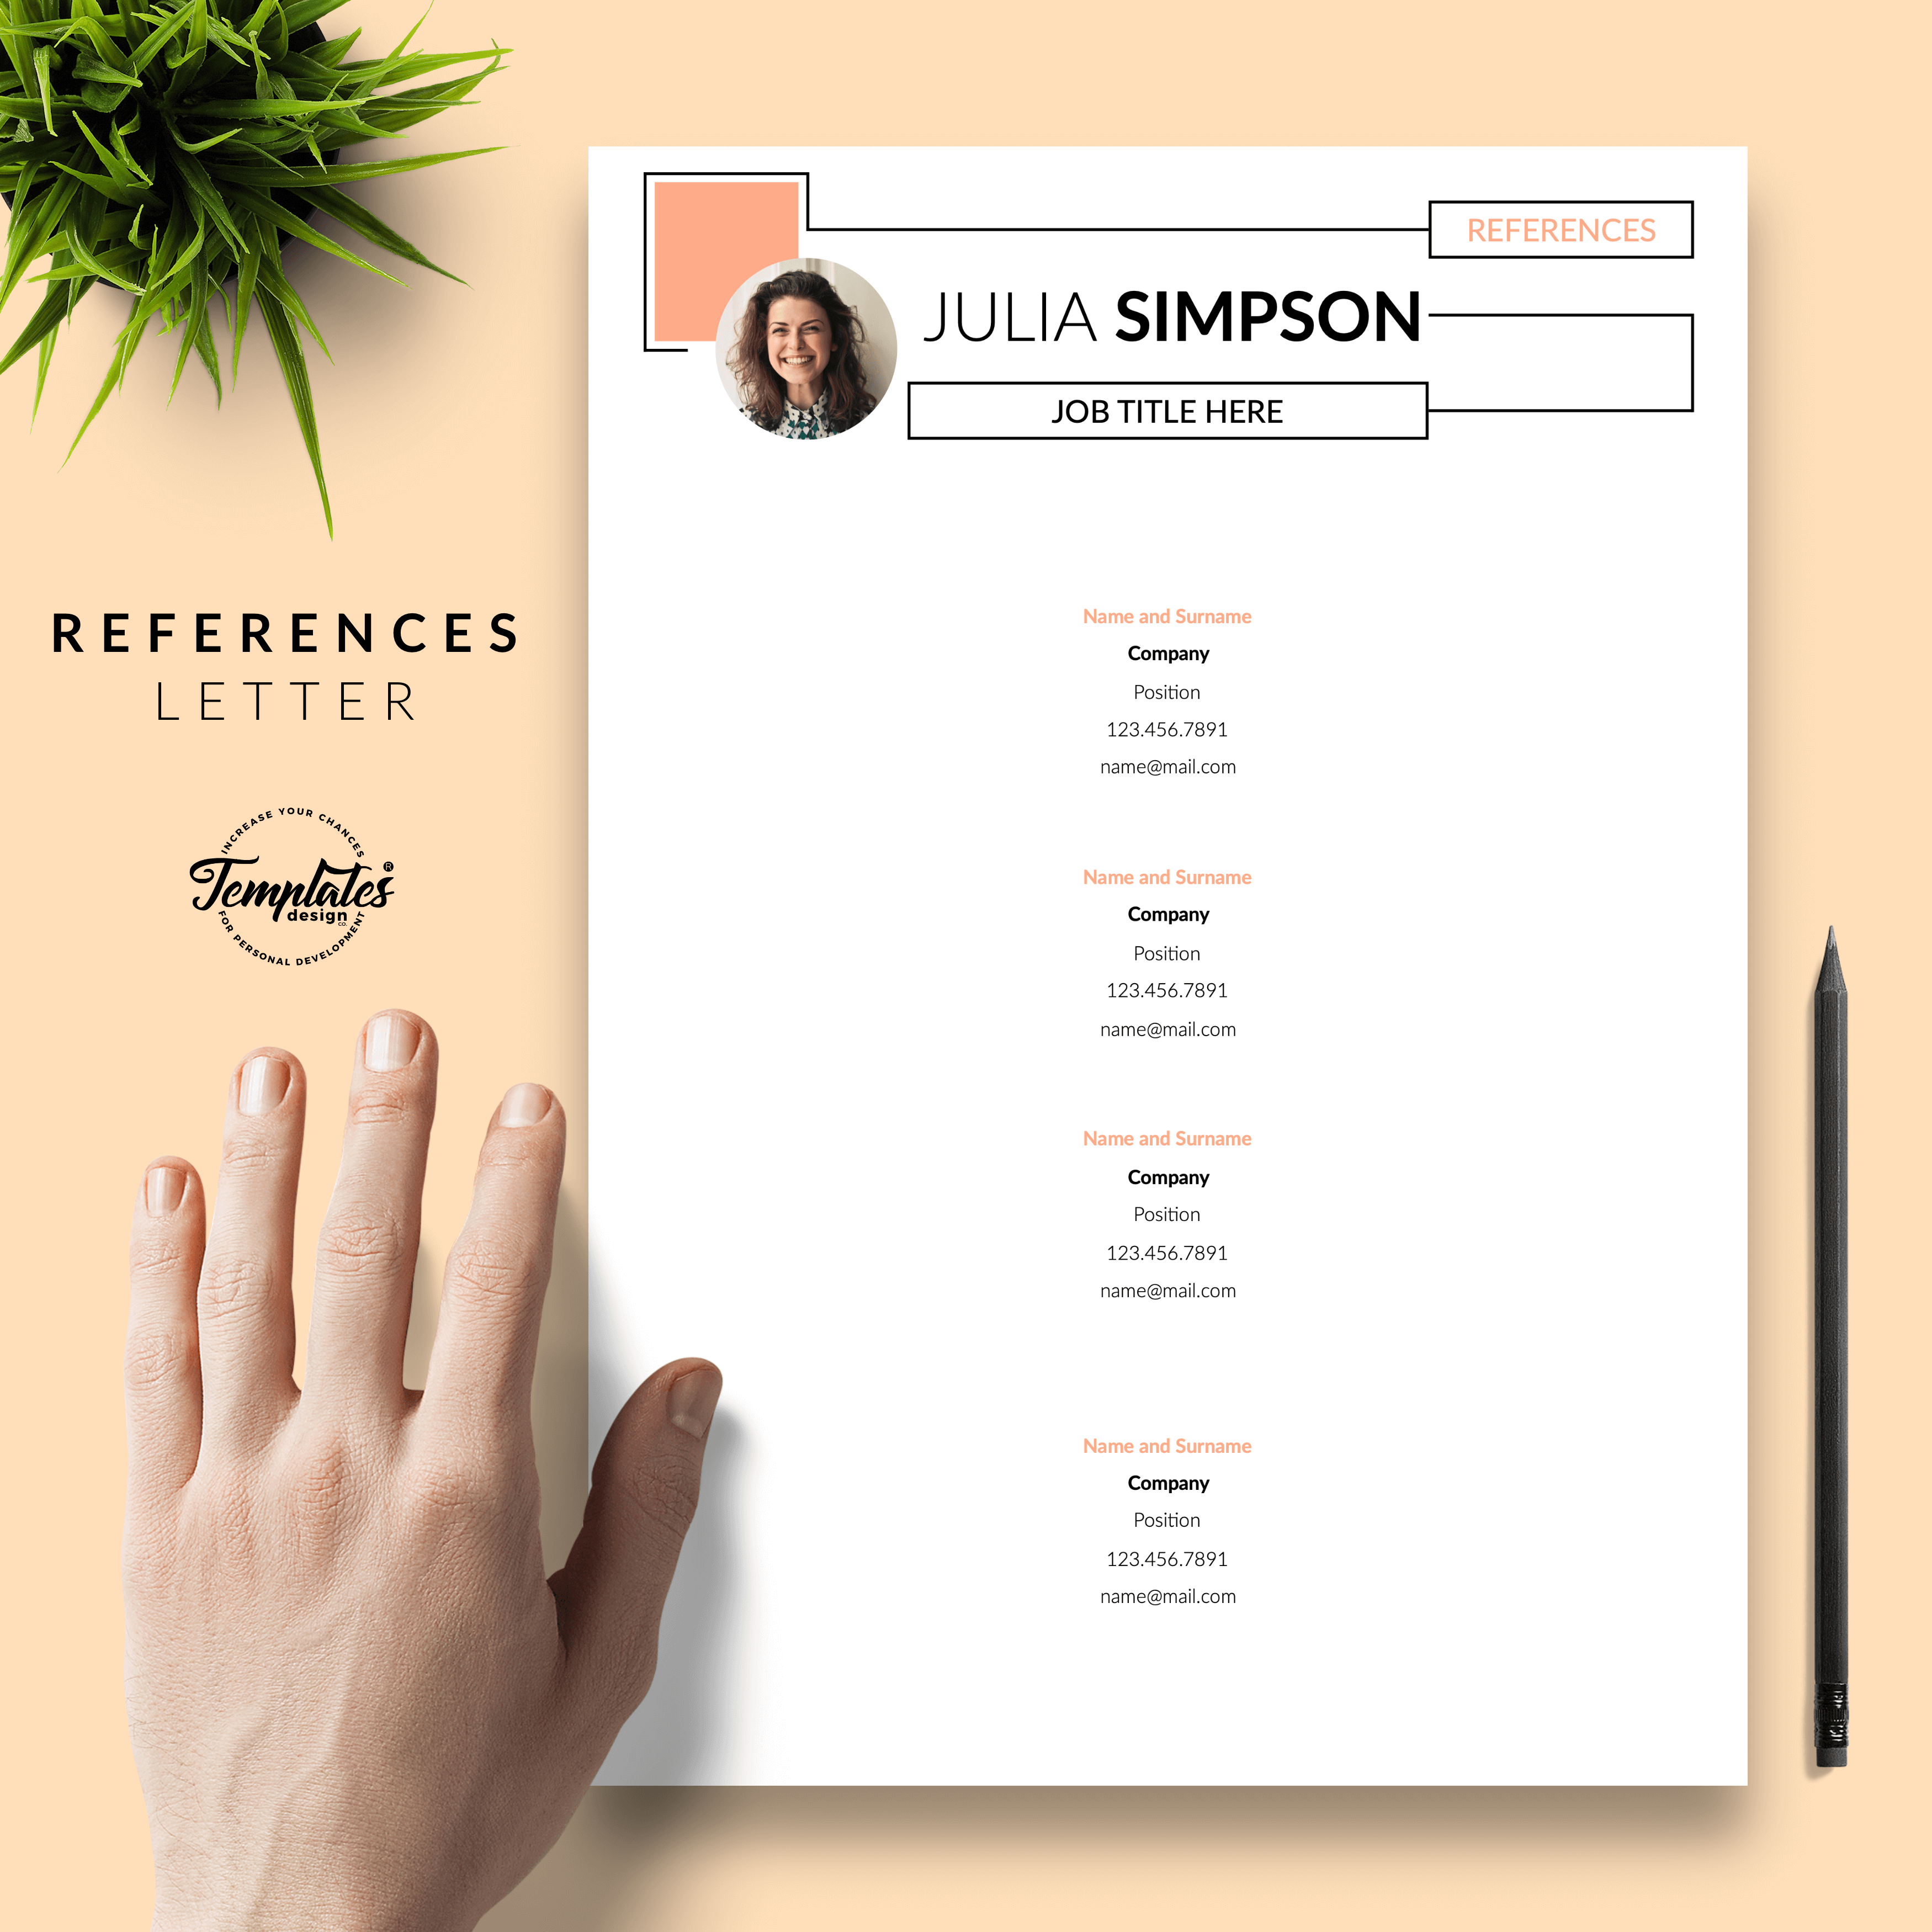 Creative Resume for Engineers - Julia Simpson 06 - References